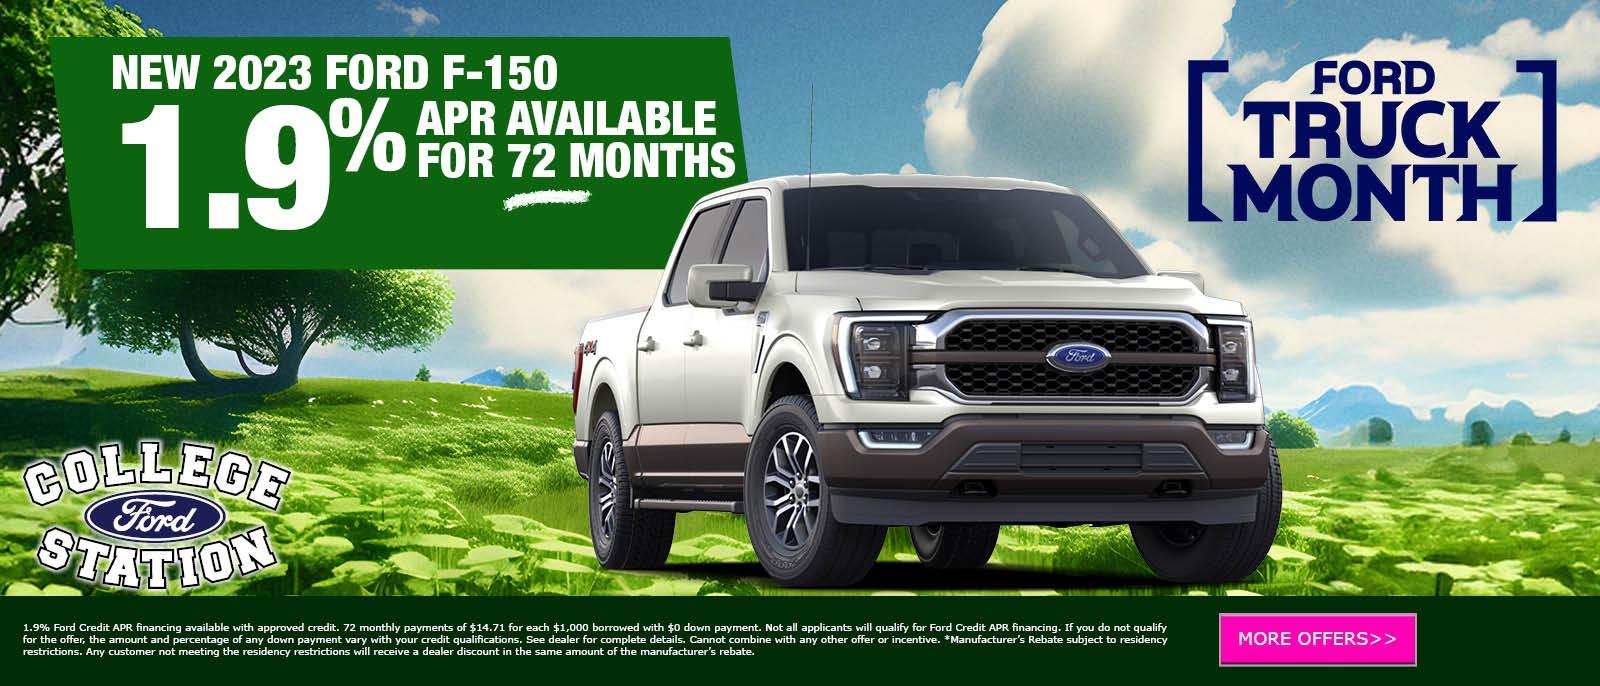 NEW 2023 FORD F-150 1.9% APR AVAILABLE FOR 72 MONTHS